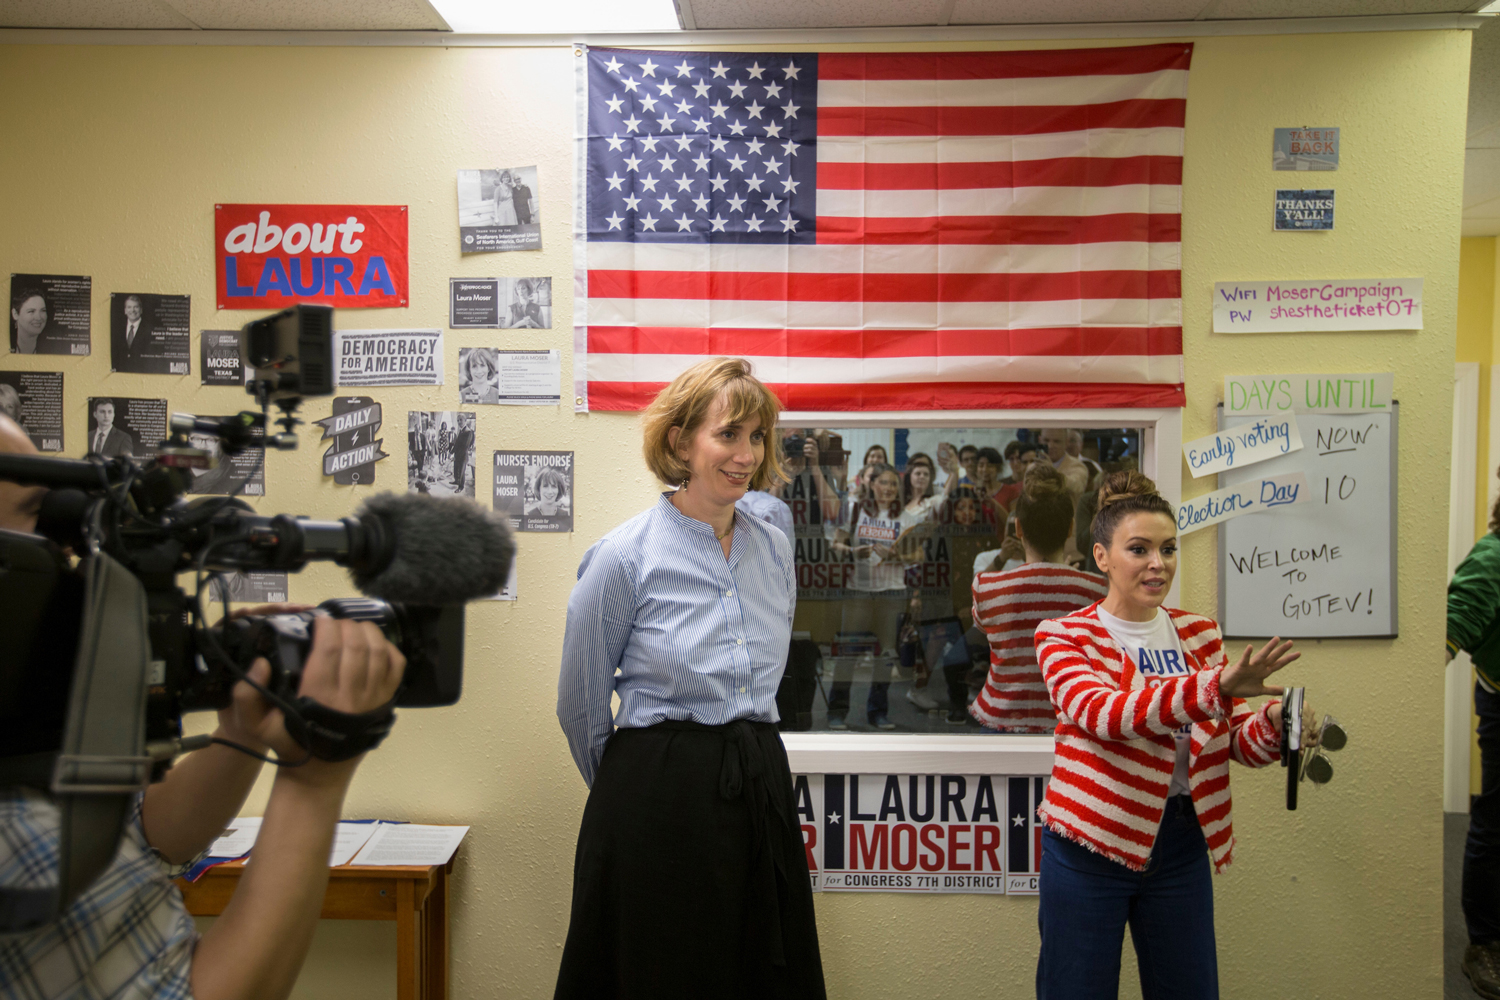 Laura Moser, one of seven Democrats competing for a Houston Congressional seat, and actress and activist Alyssa Milano speak to campaign volunteers on Saturday. In an unusual move, Moser was called out by her own party when the Democratic Congressional Campaign Committee called her too liberal for the district. 